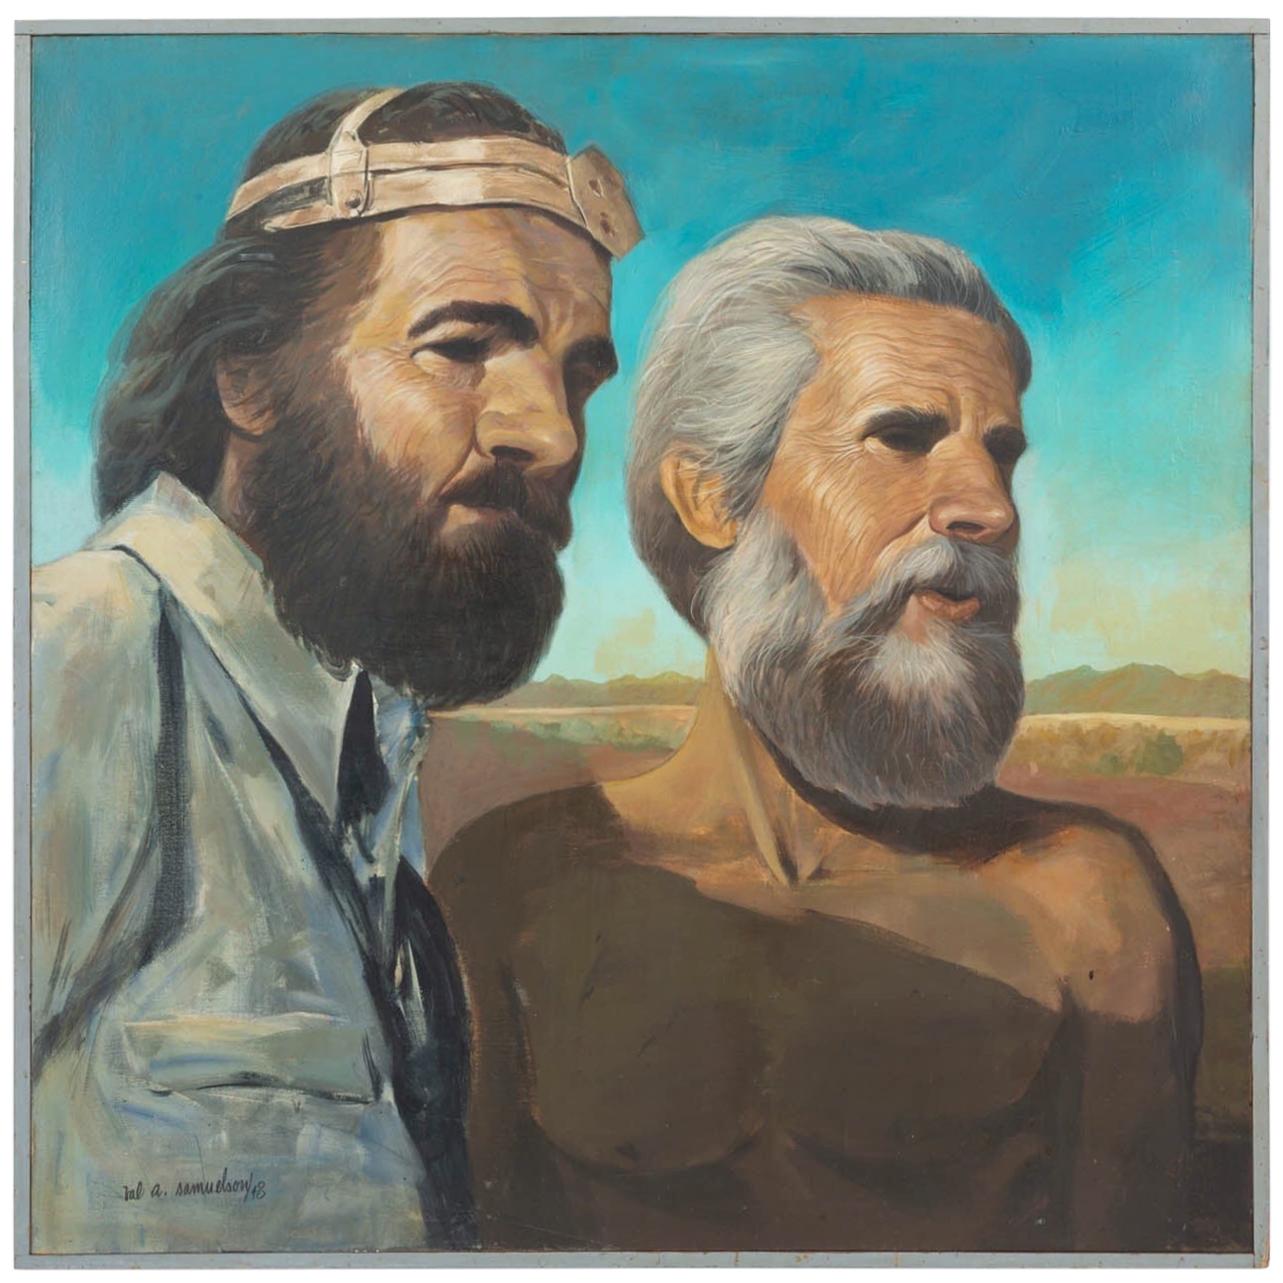 "The Prospectors" Painting by Val Samuelson